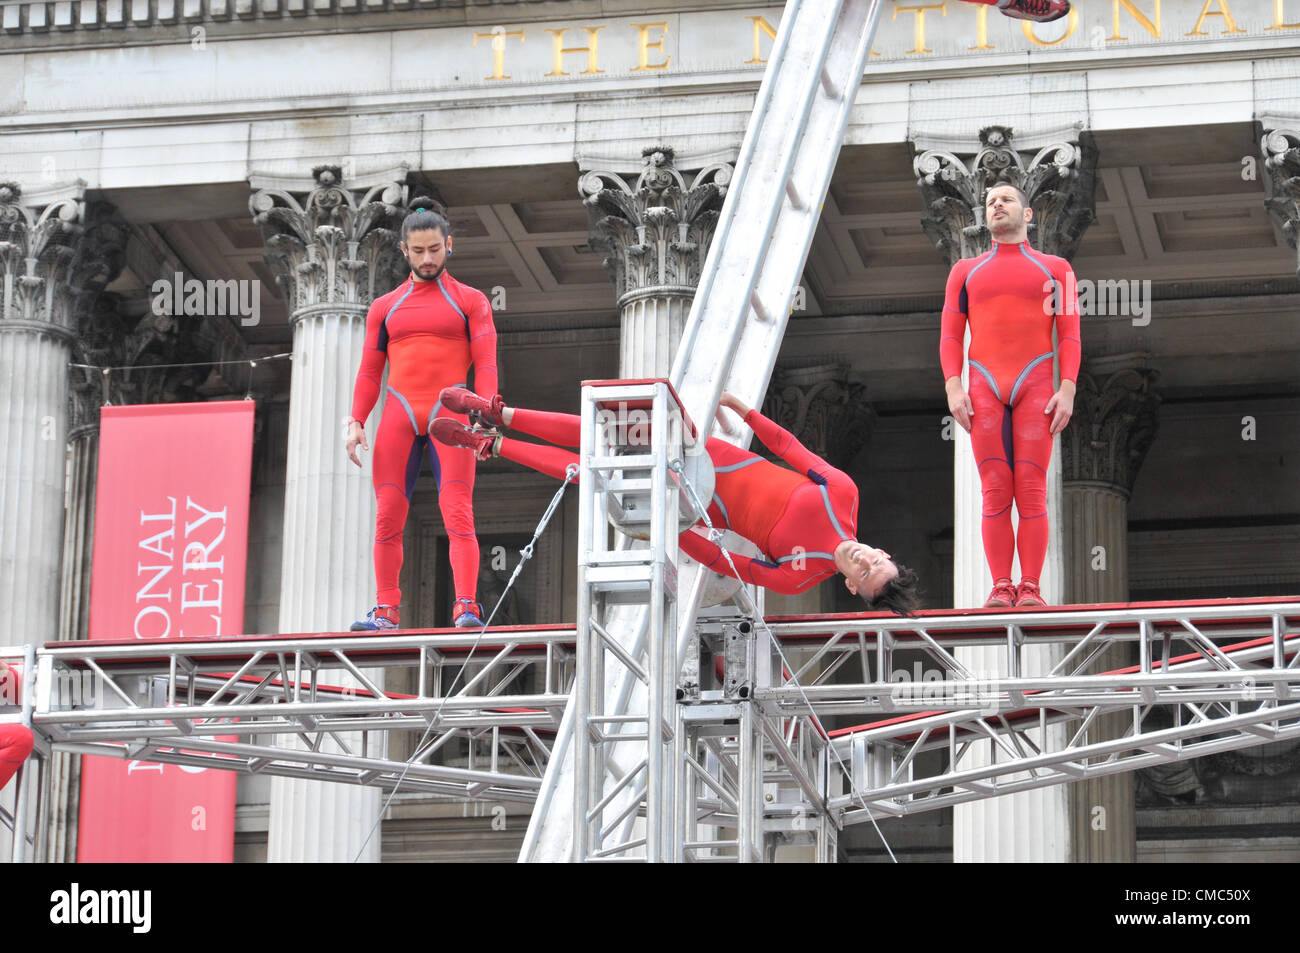 London, UK. 15th July 2012. Performers on the spinning ladder. One Extraordinary Day, Surprises: Streb. Choreographer Elizabeth Streb and her New York dance company 'Action Heroes' with their performance ASCENSION in front of the National Gallery. Stock Photo